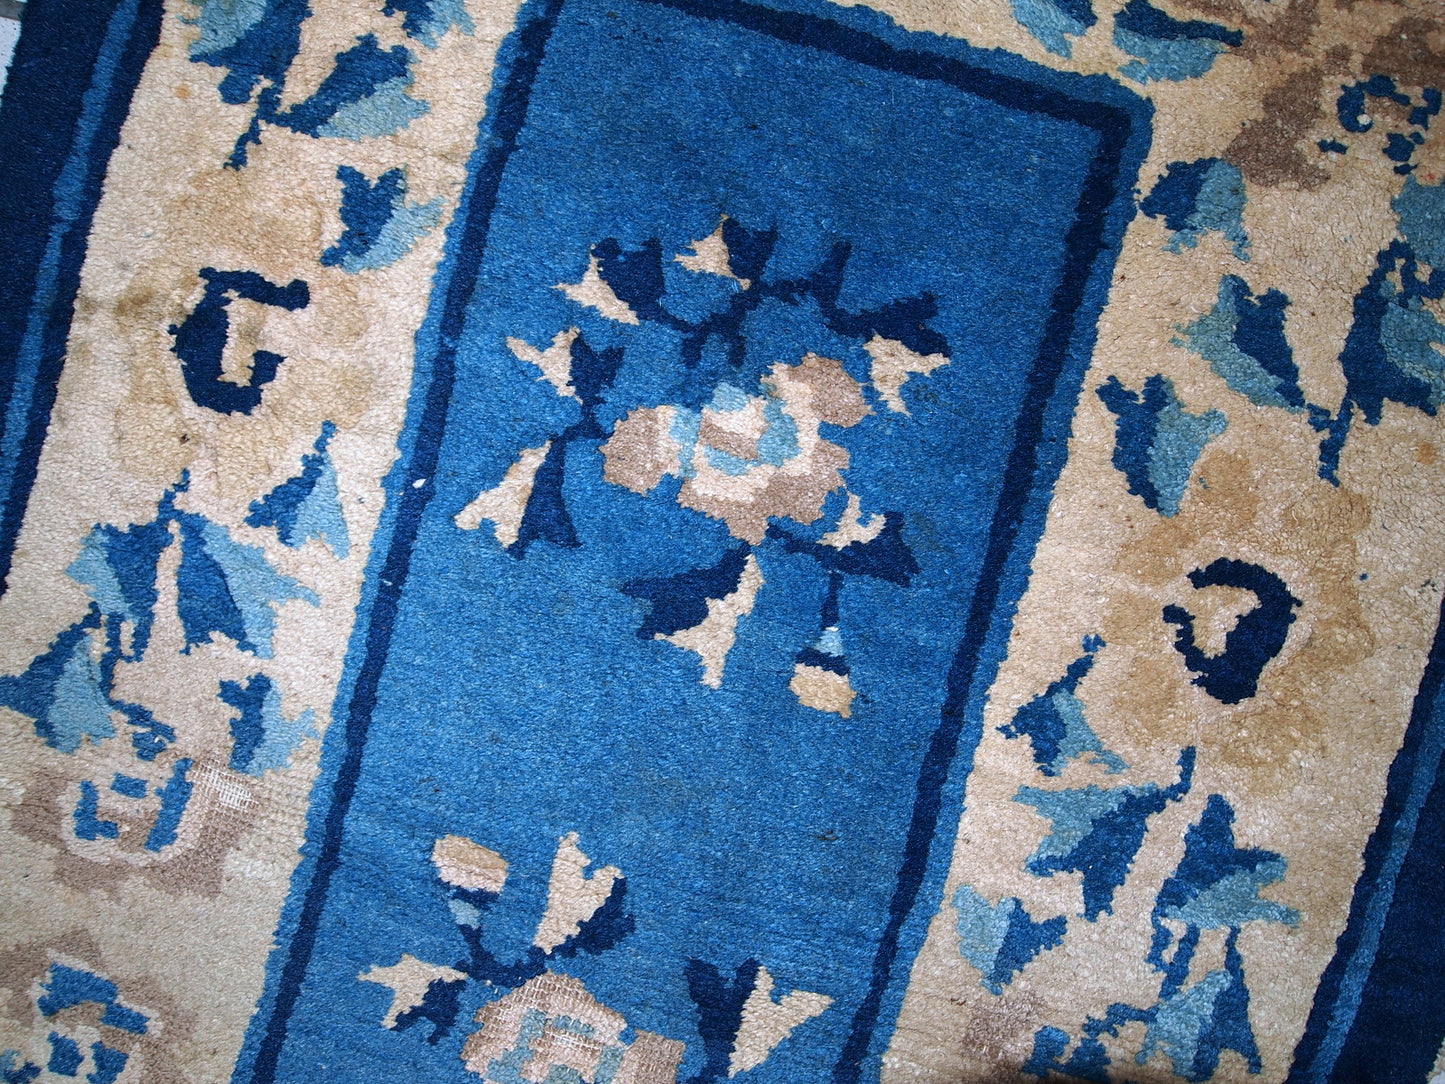 Close-up of the navy blue elements in the rug's design.